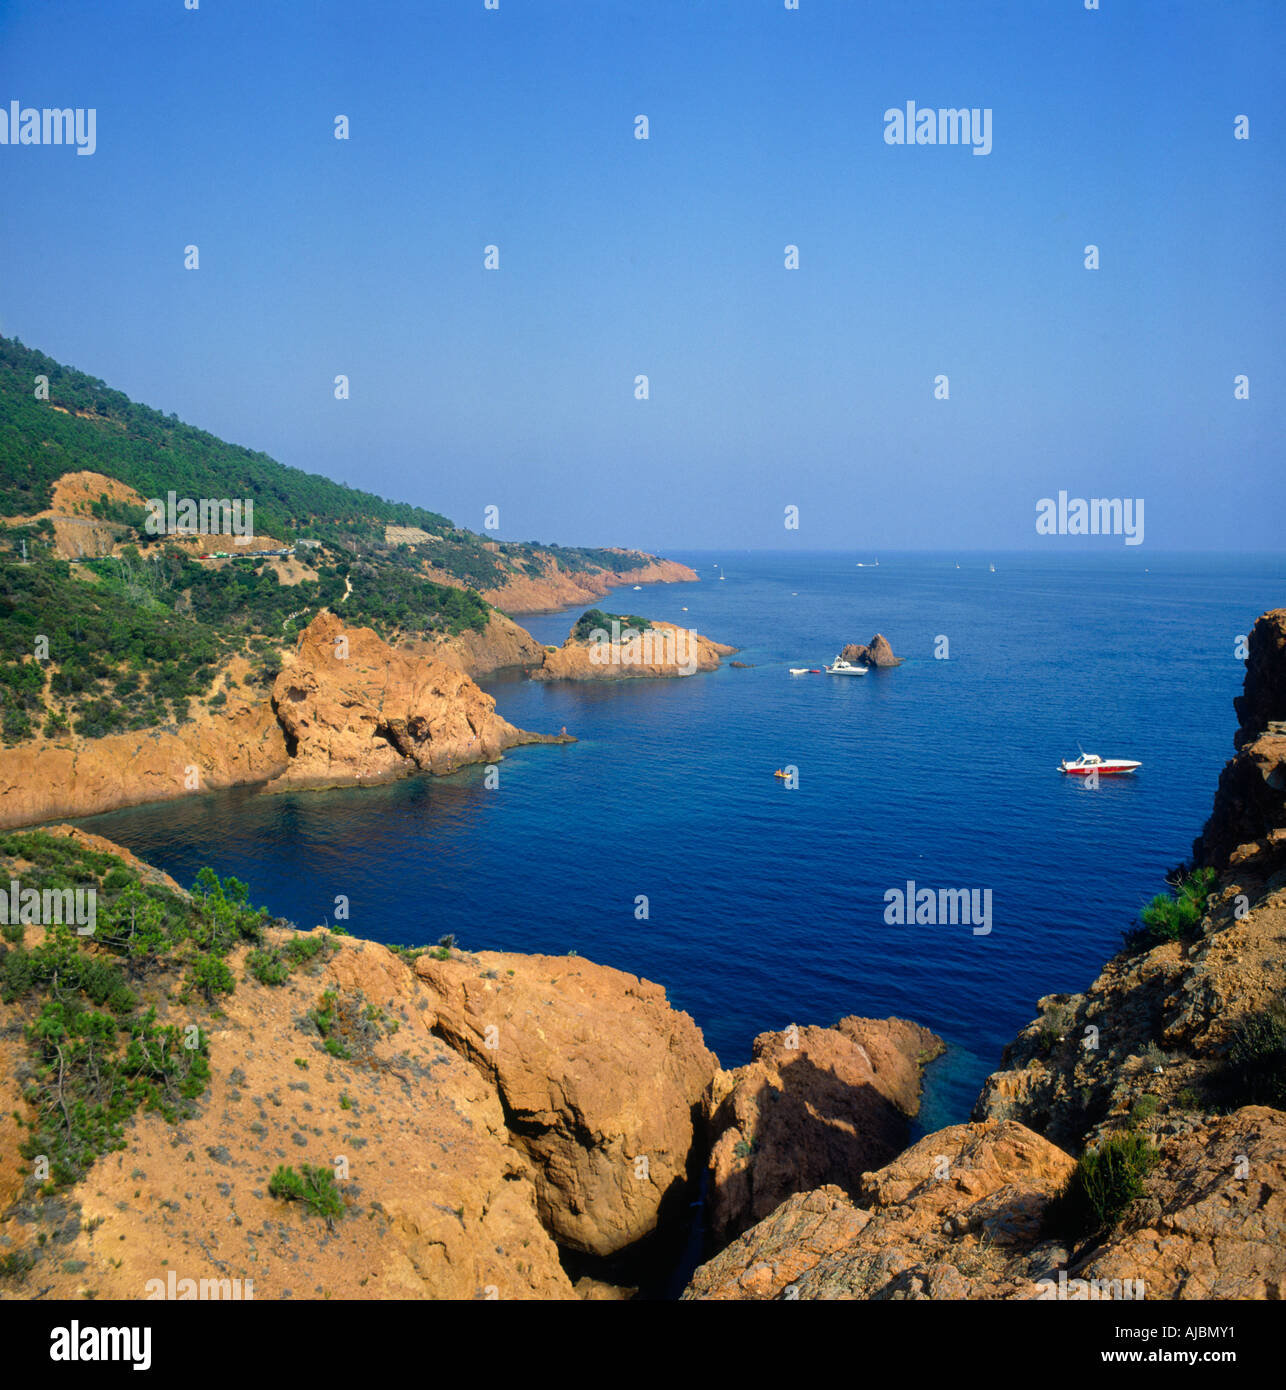 Looking across rugged rocks into blue bay with small motor launch at anchor Cap Roux Corniche de l`Esterel in South of France Stock Photo